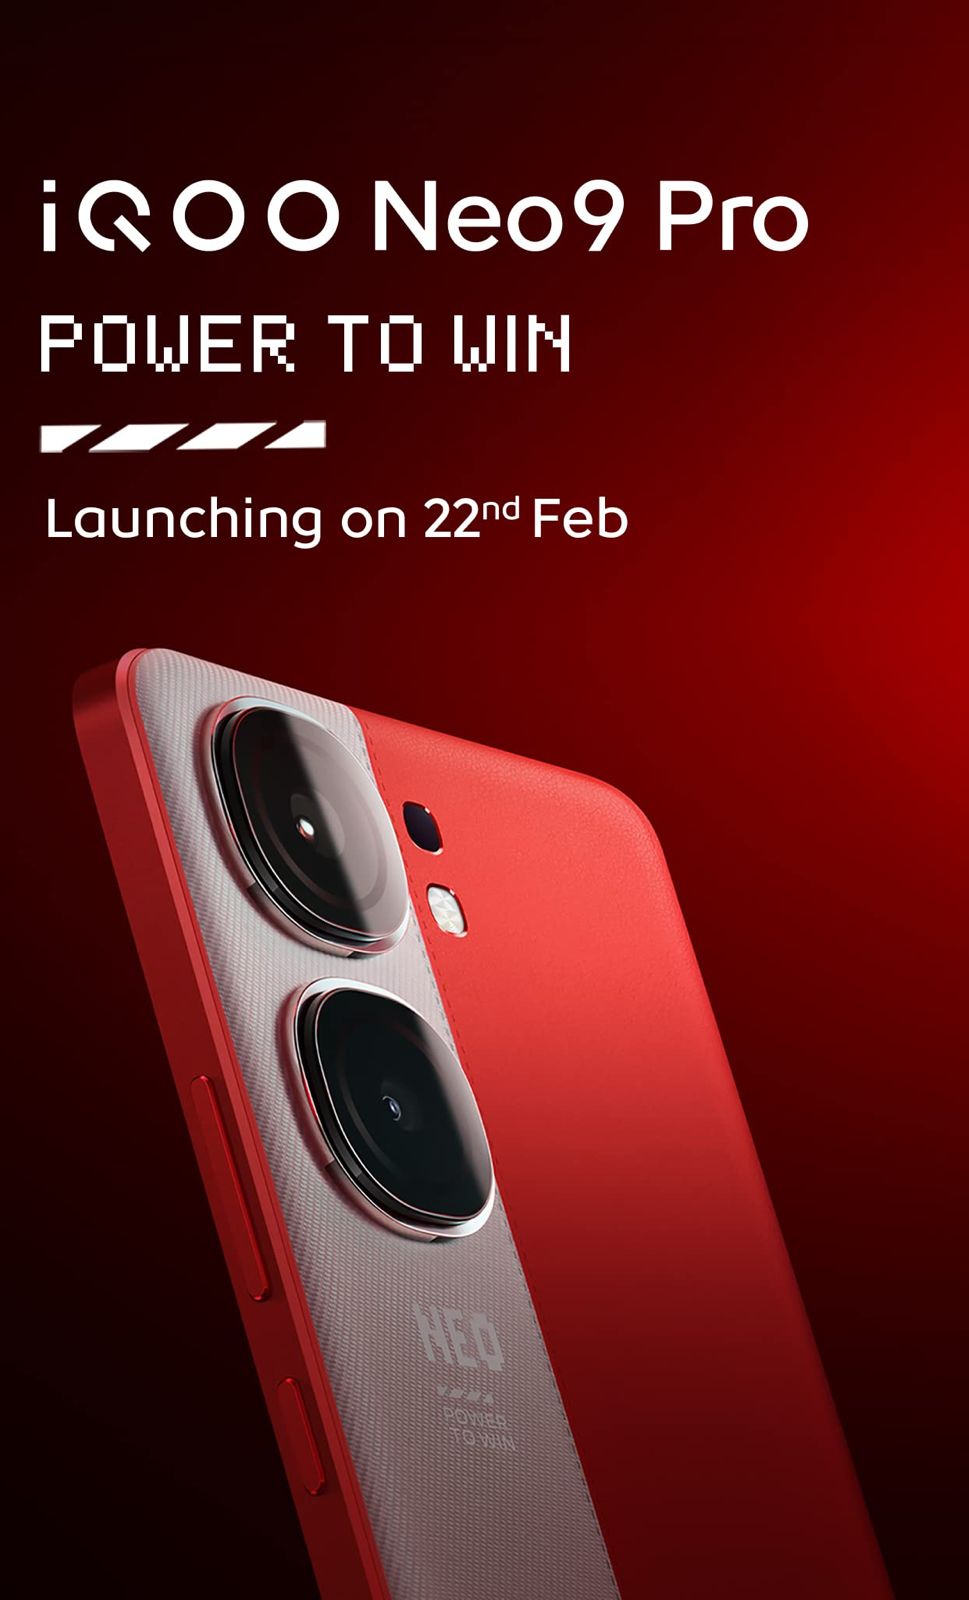 iQOO Neo 9 Pro is all set to Launch on February 22